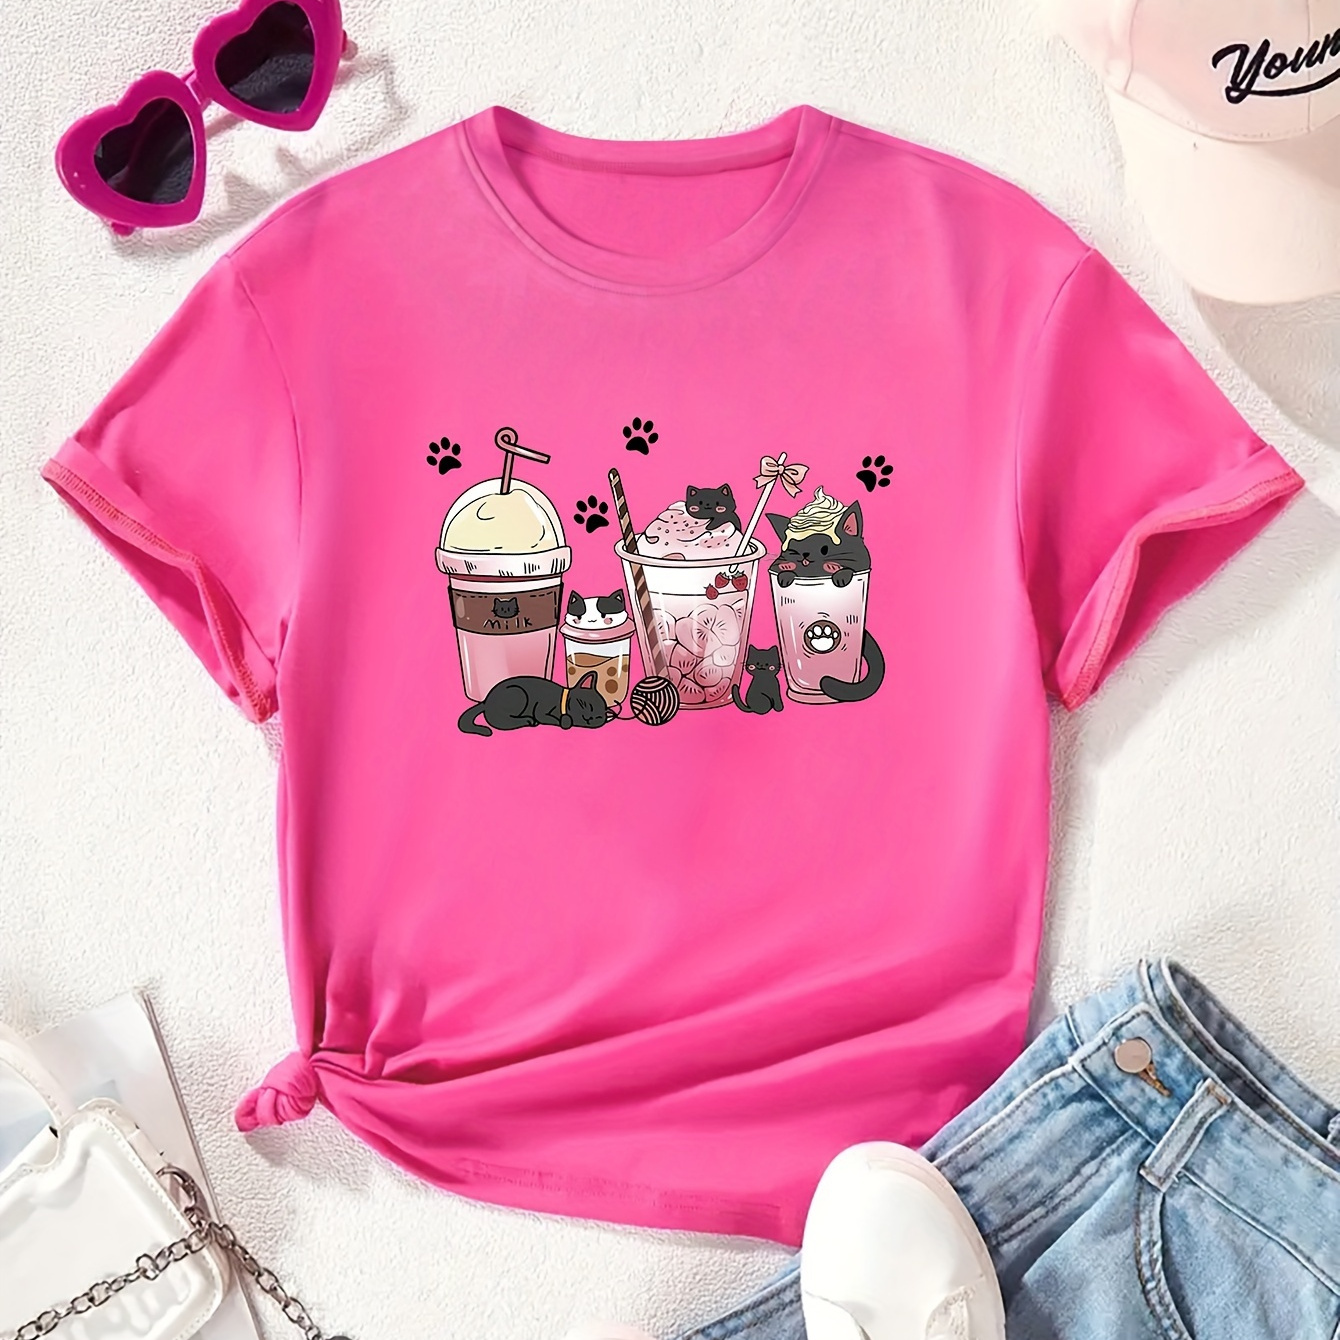 

Cartoon Coffee Cups With Black Cats Graphic Print, Girls' Casual Crew Neck Short Sleeve T-shirts, Comfy Top Clothes For Spring And Summer For Exercise